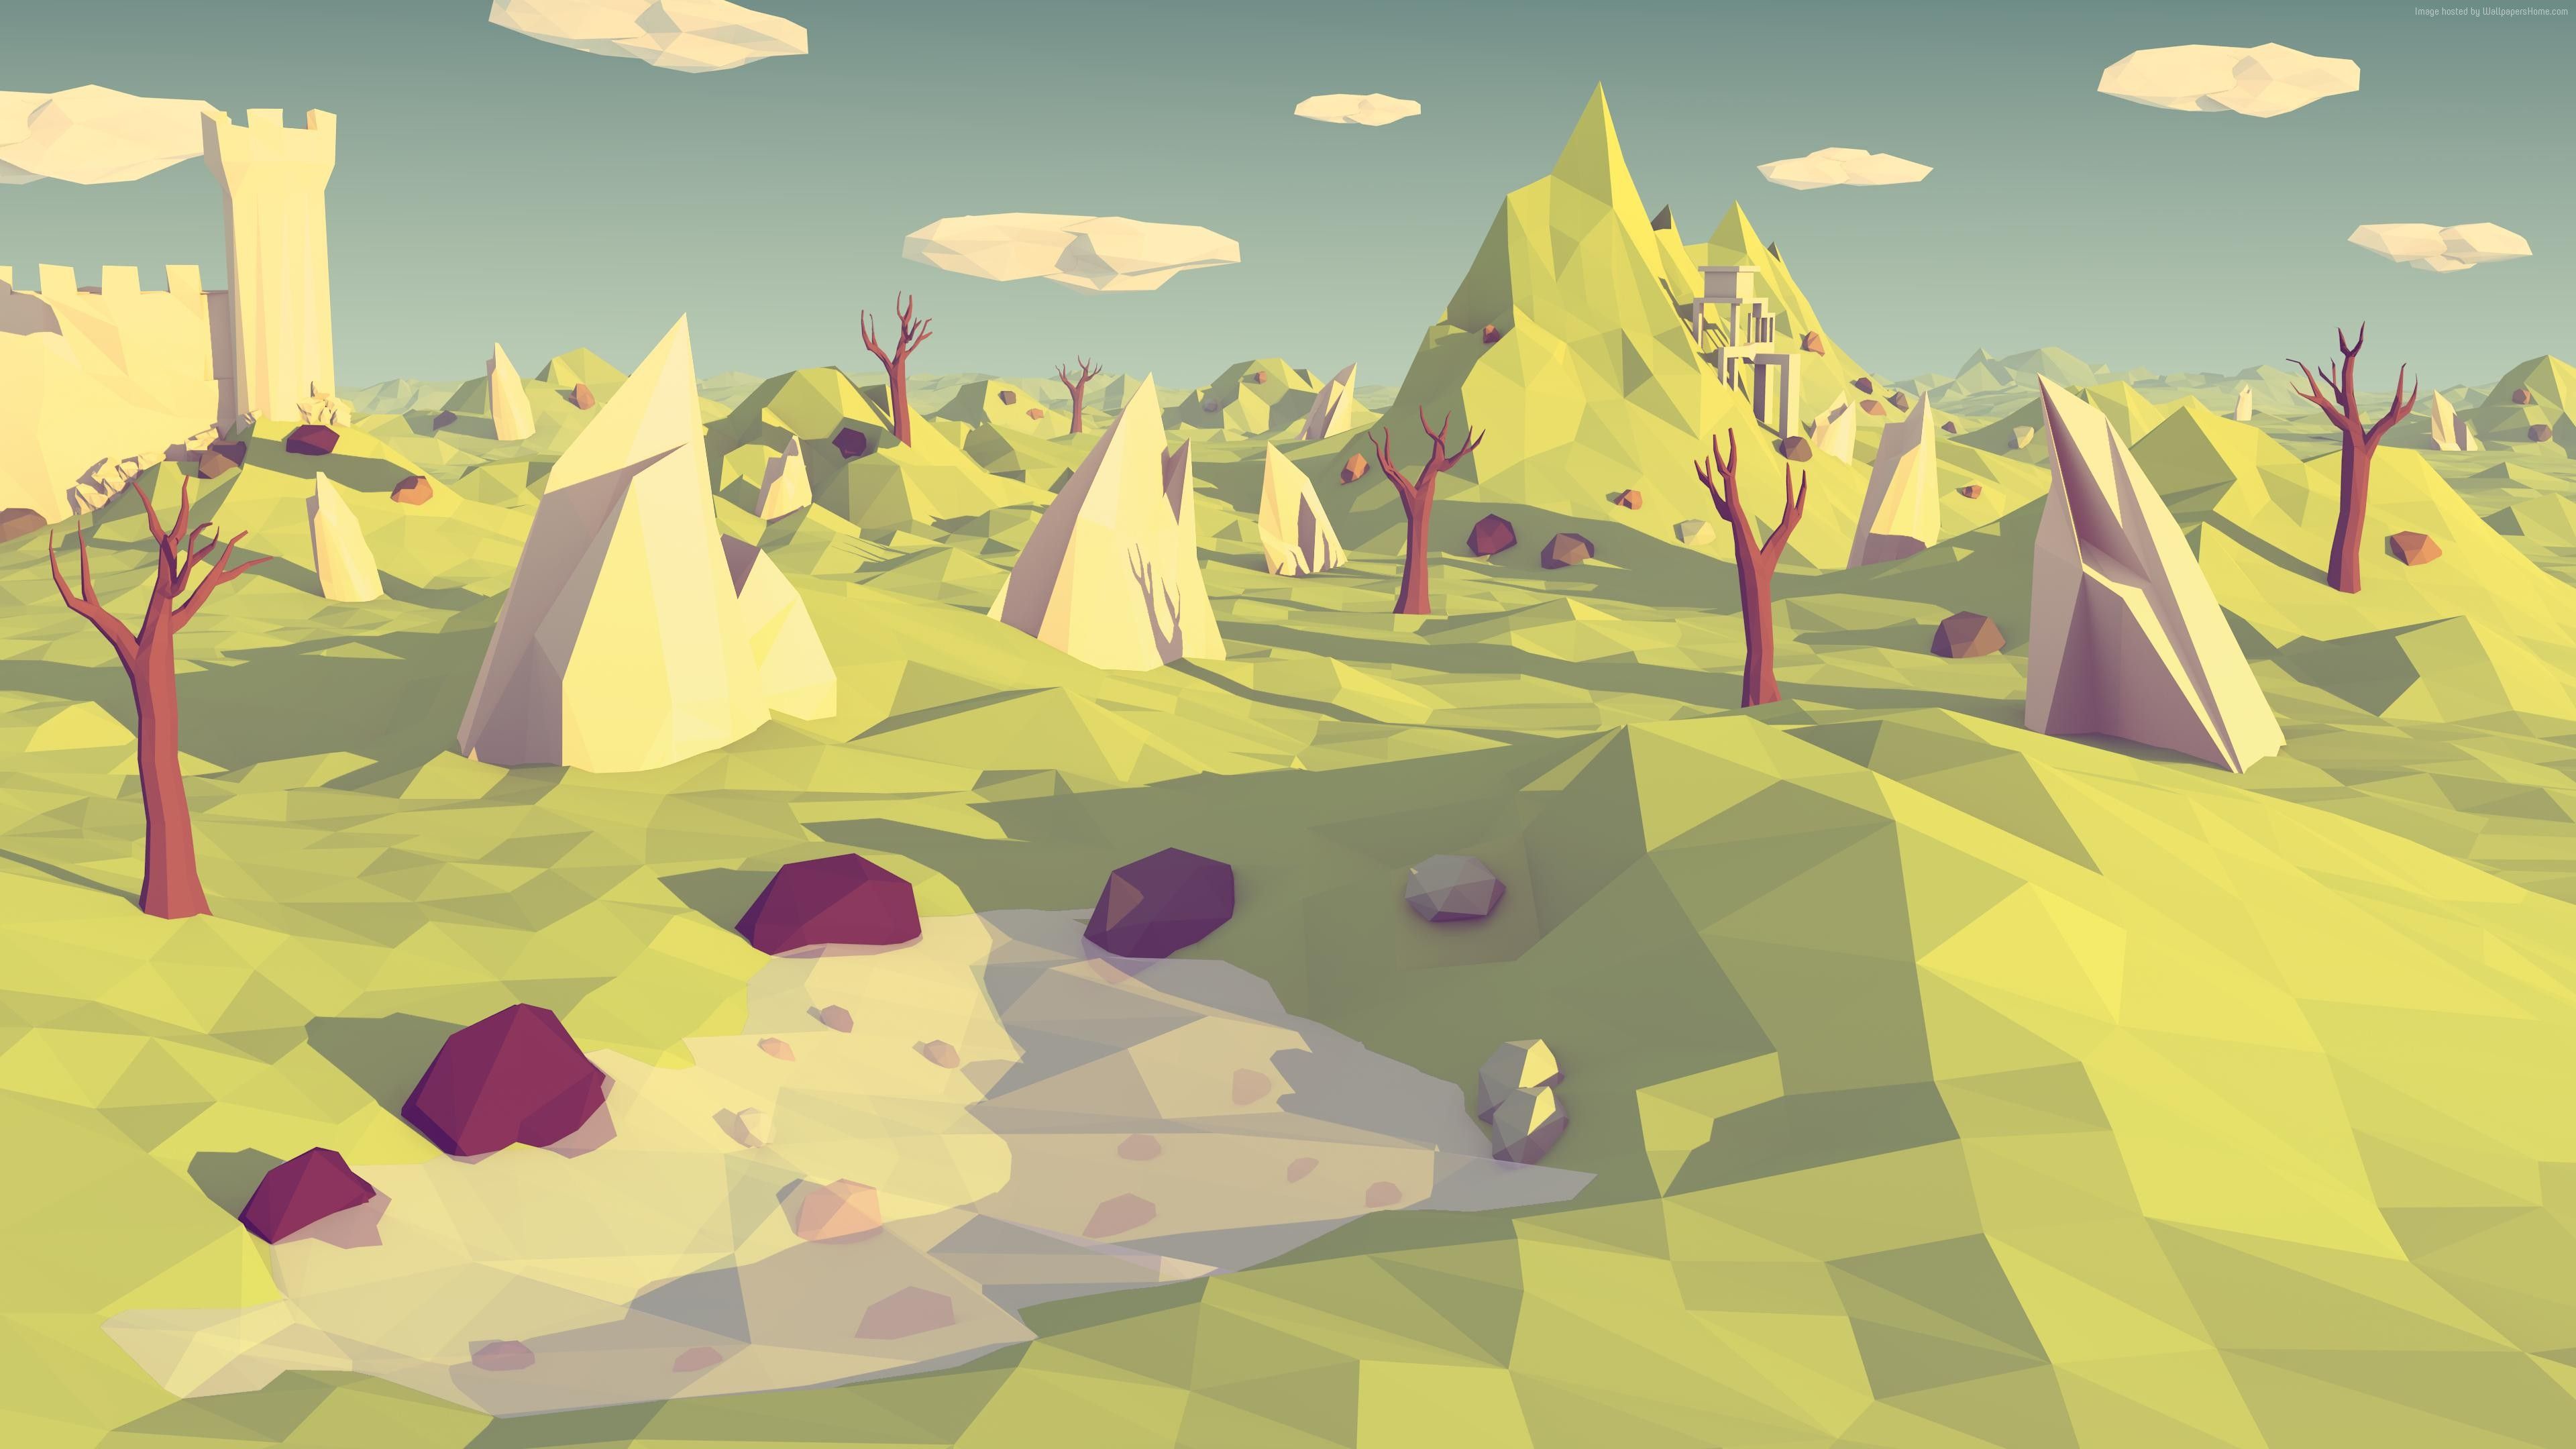 A low poly illustration of a mountainous landscape with a castle in the distance. - Low poly